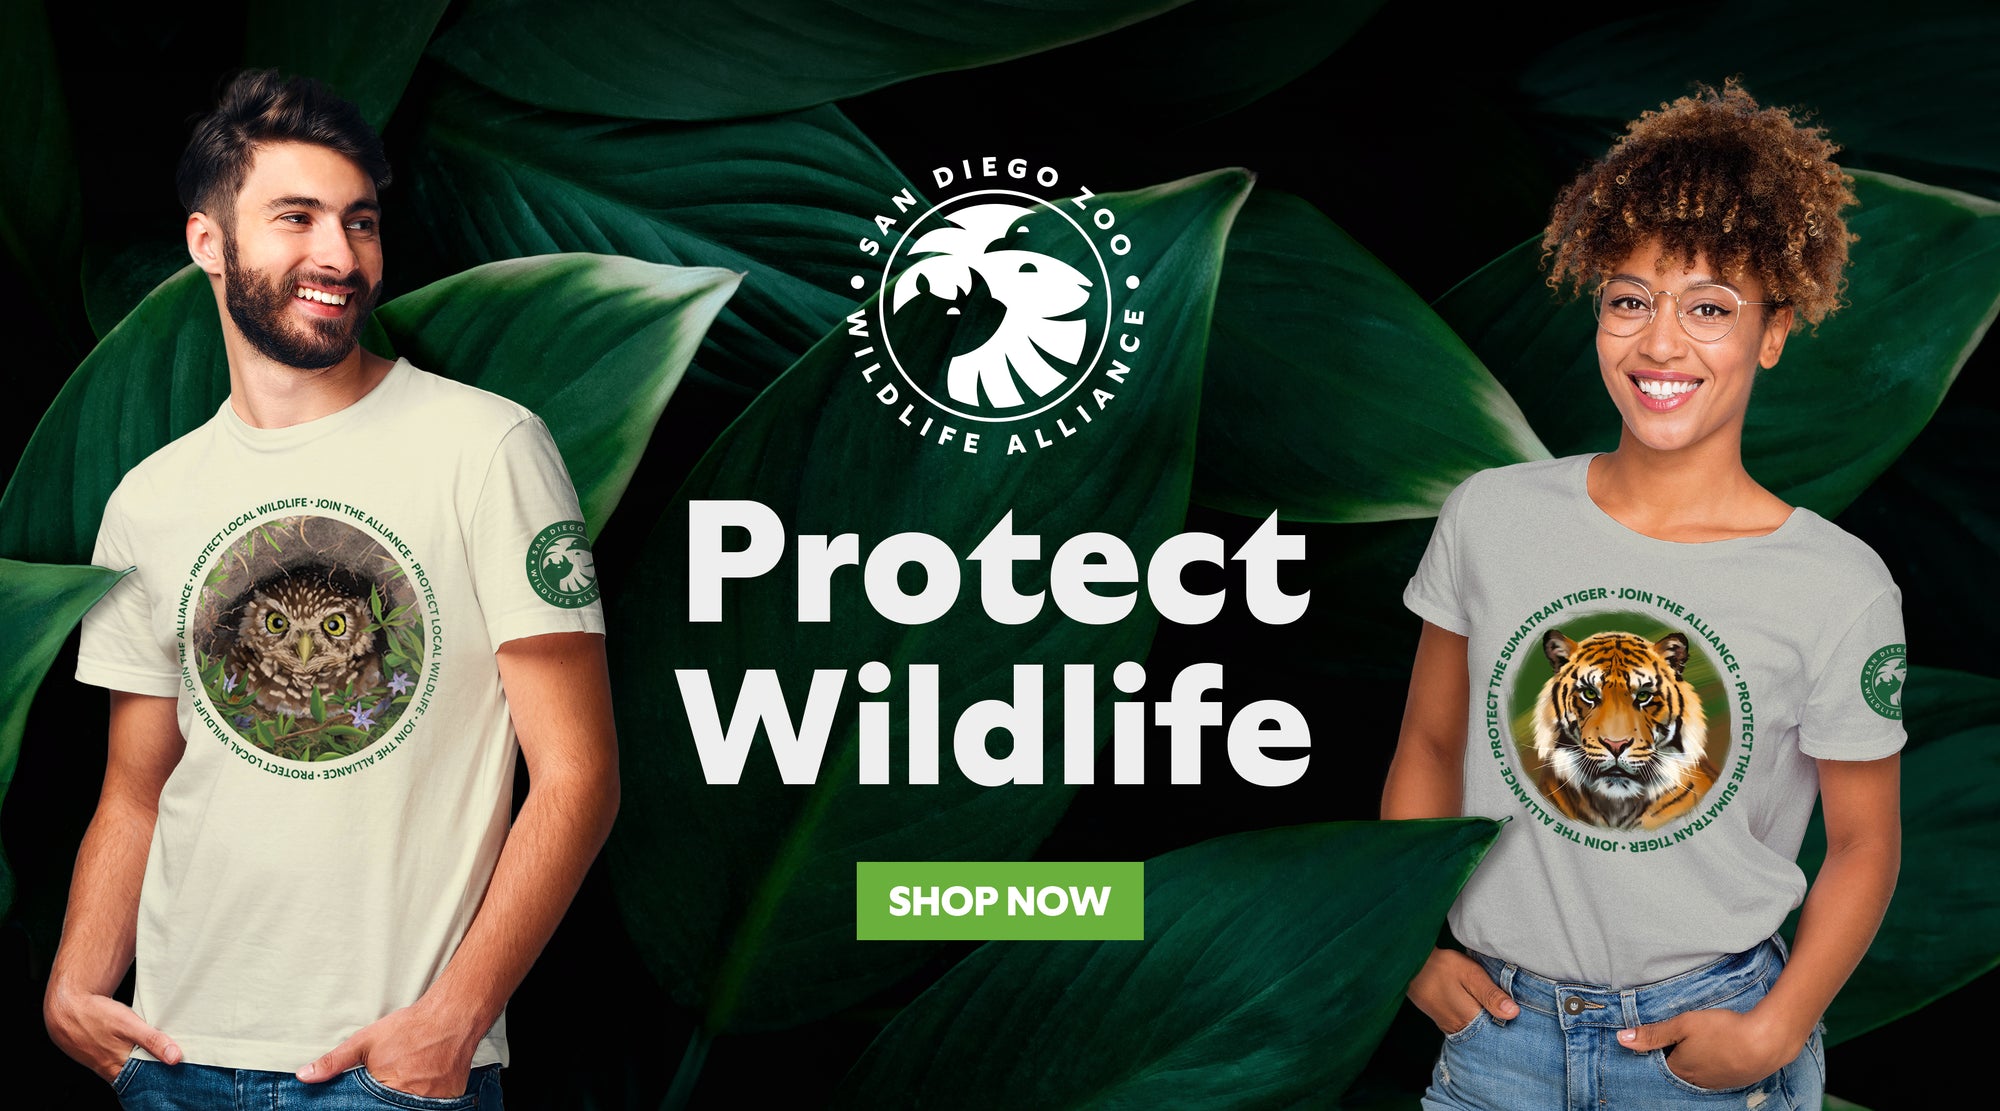 Protect Wildlife with our San Diego Zoo Wildlife Alliance collection